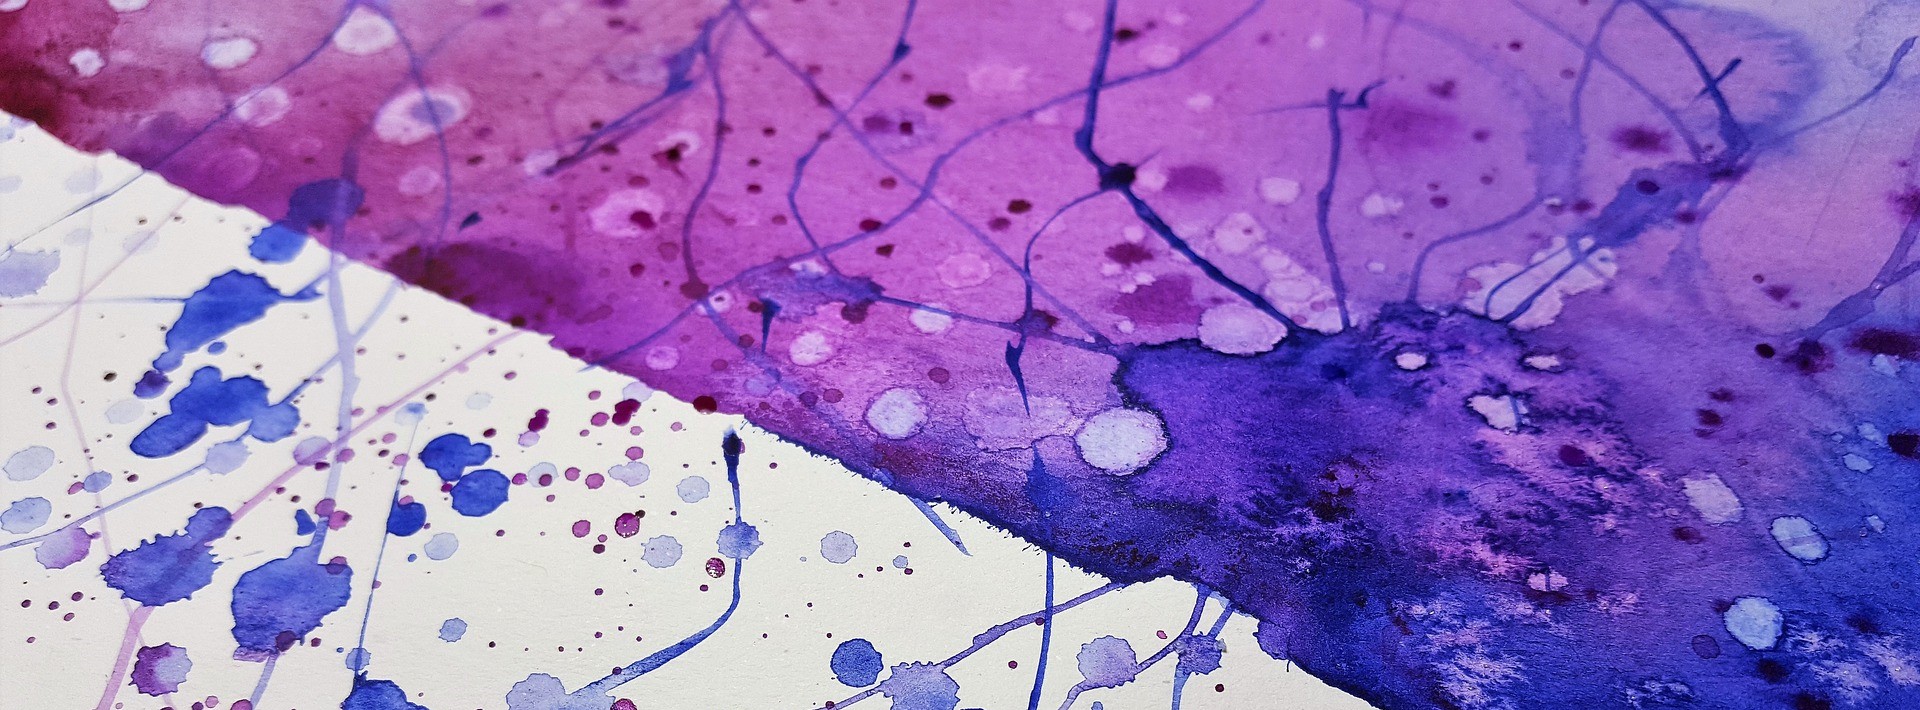 An abstract image of watercolor paint divided by a sharp line